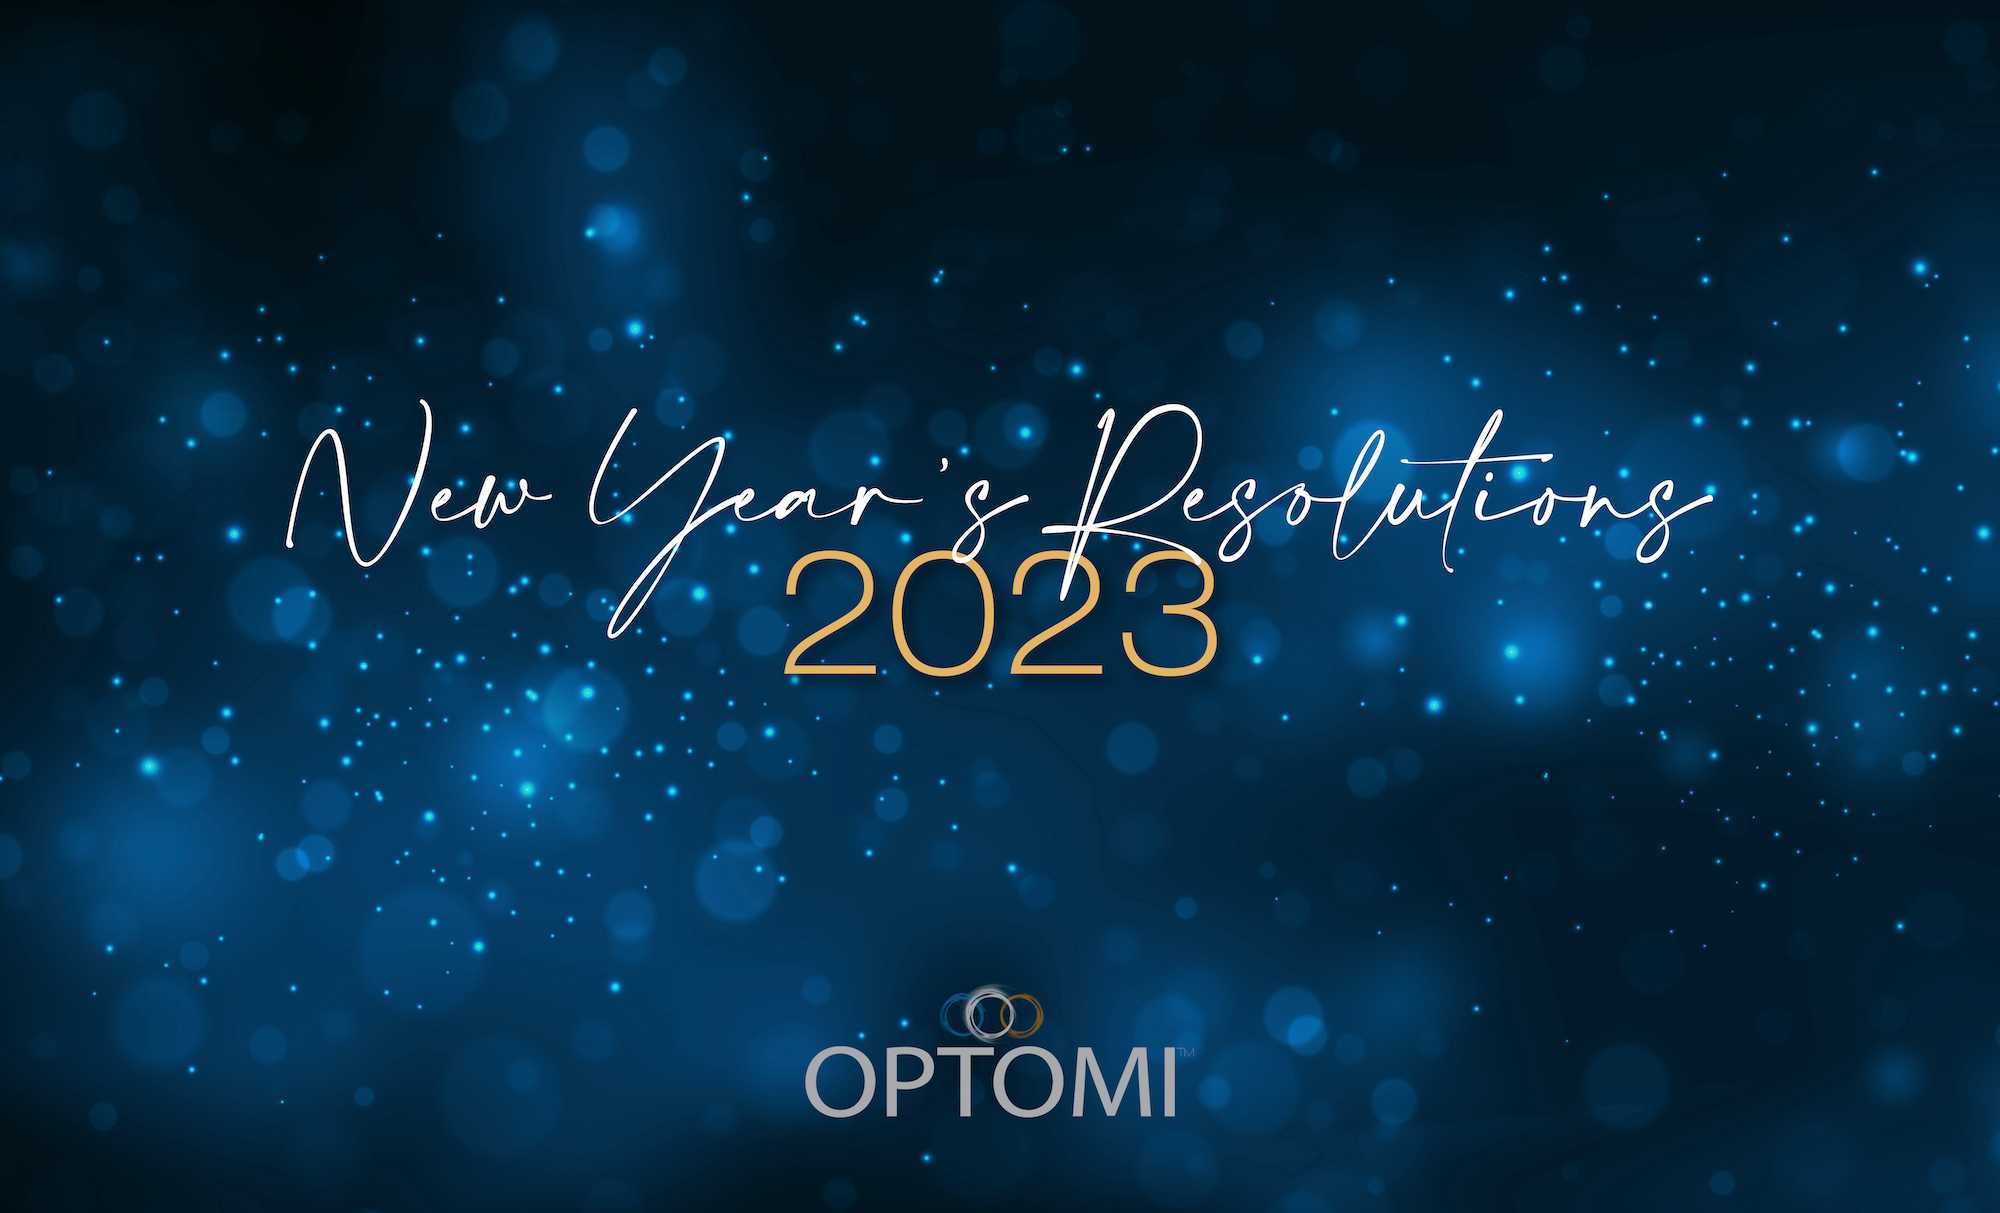 Optomi’s 2023 New Year’s Resolutions